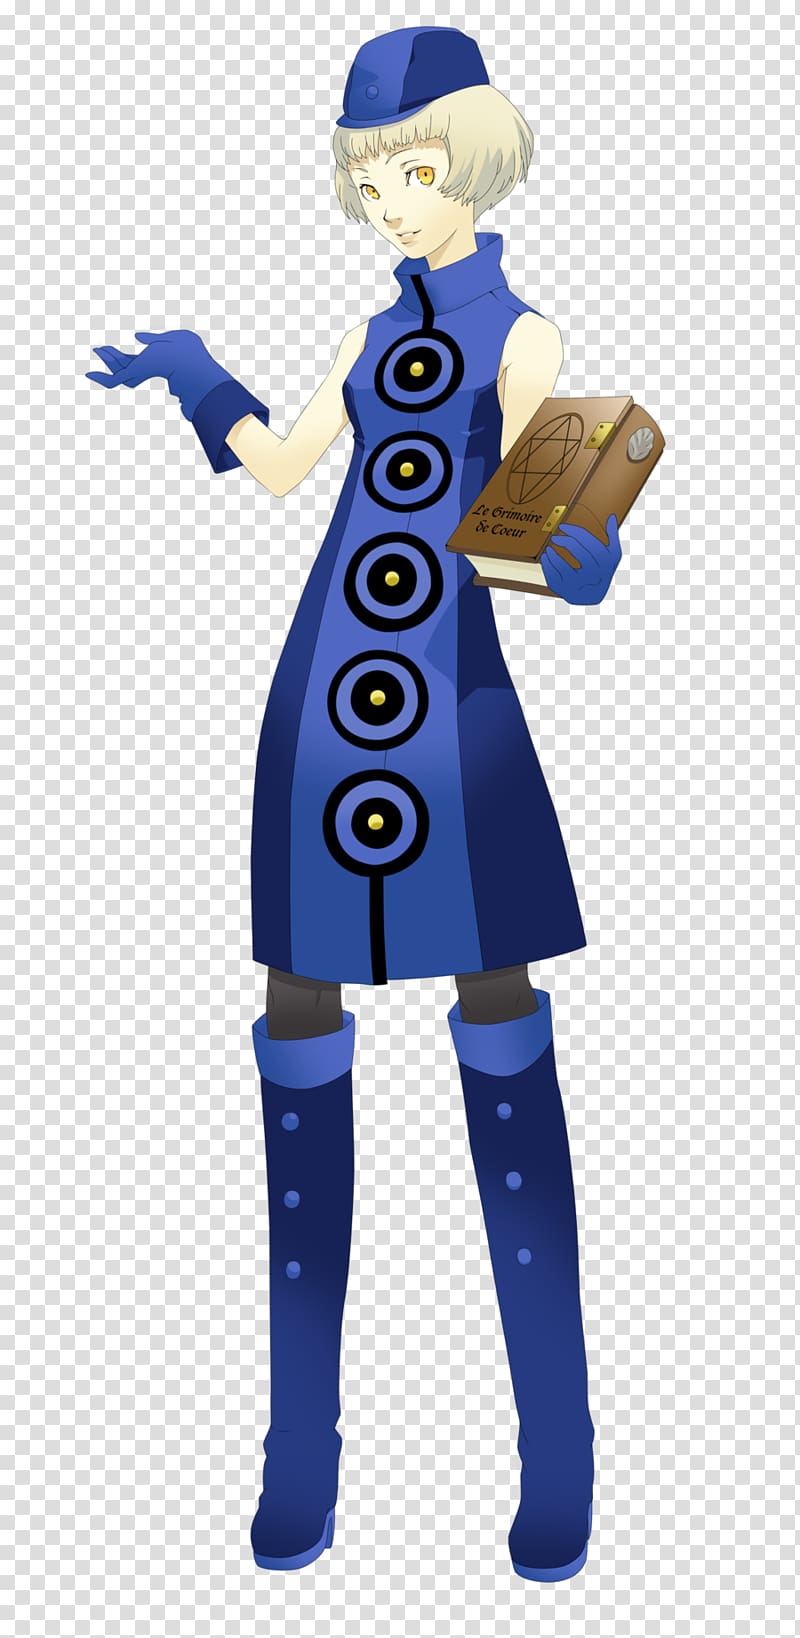 Shin Megami Tensei: Persona 3 Persona 3: Dancing Moon Night Persona 4 Arena Ultimax Shin Megami Tensei: Persona 4, others transparent background PNG clipart